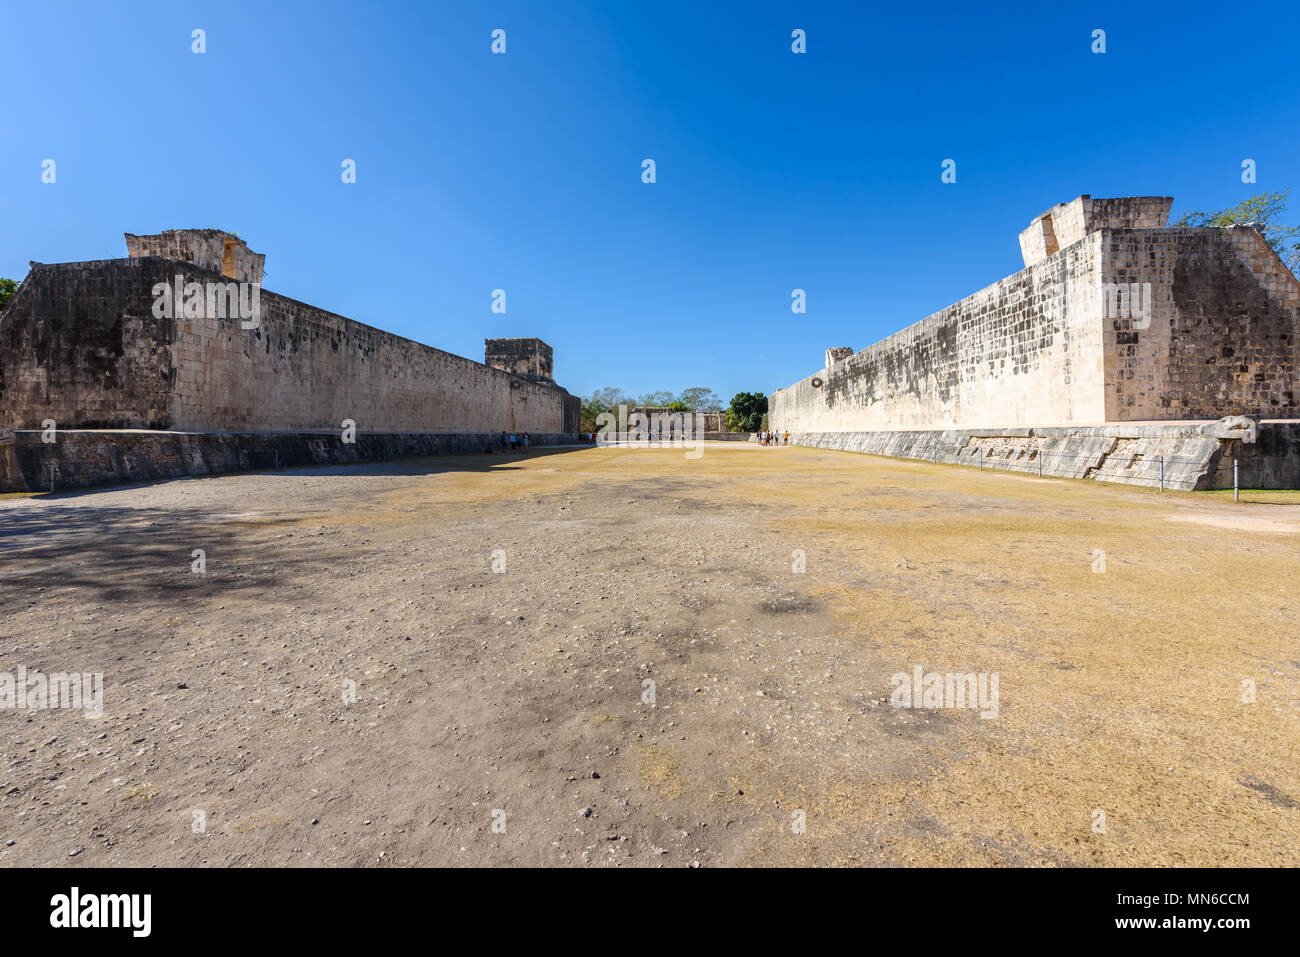 View of the ballcourt at Chichen Itza, old historic ruins in Yucatan, Mexico Stock Photo